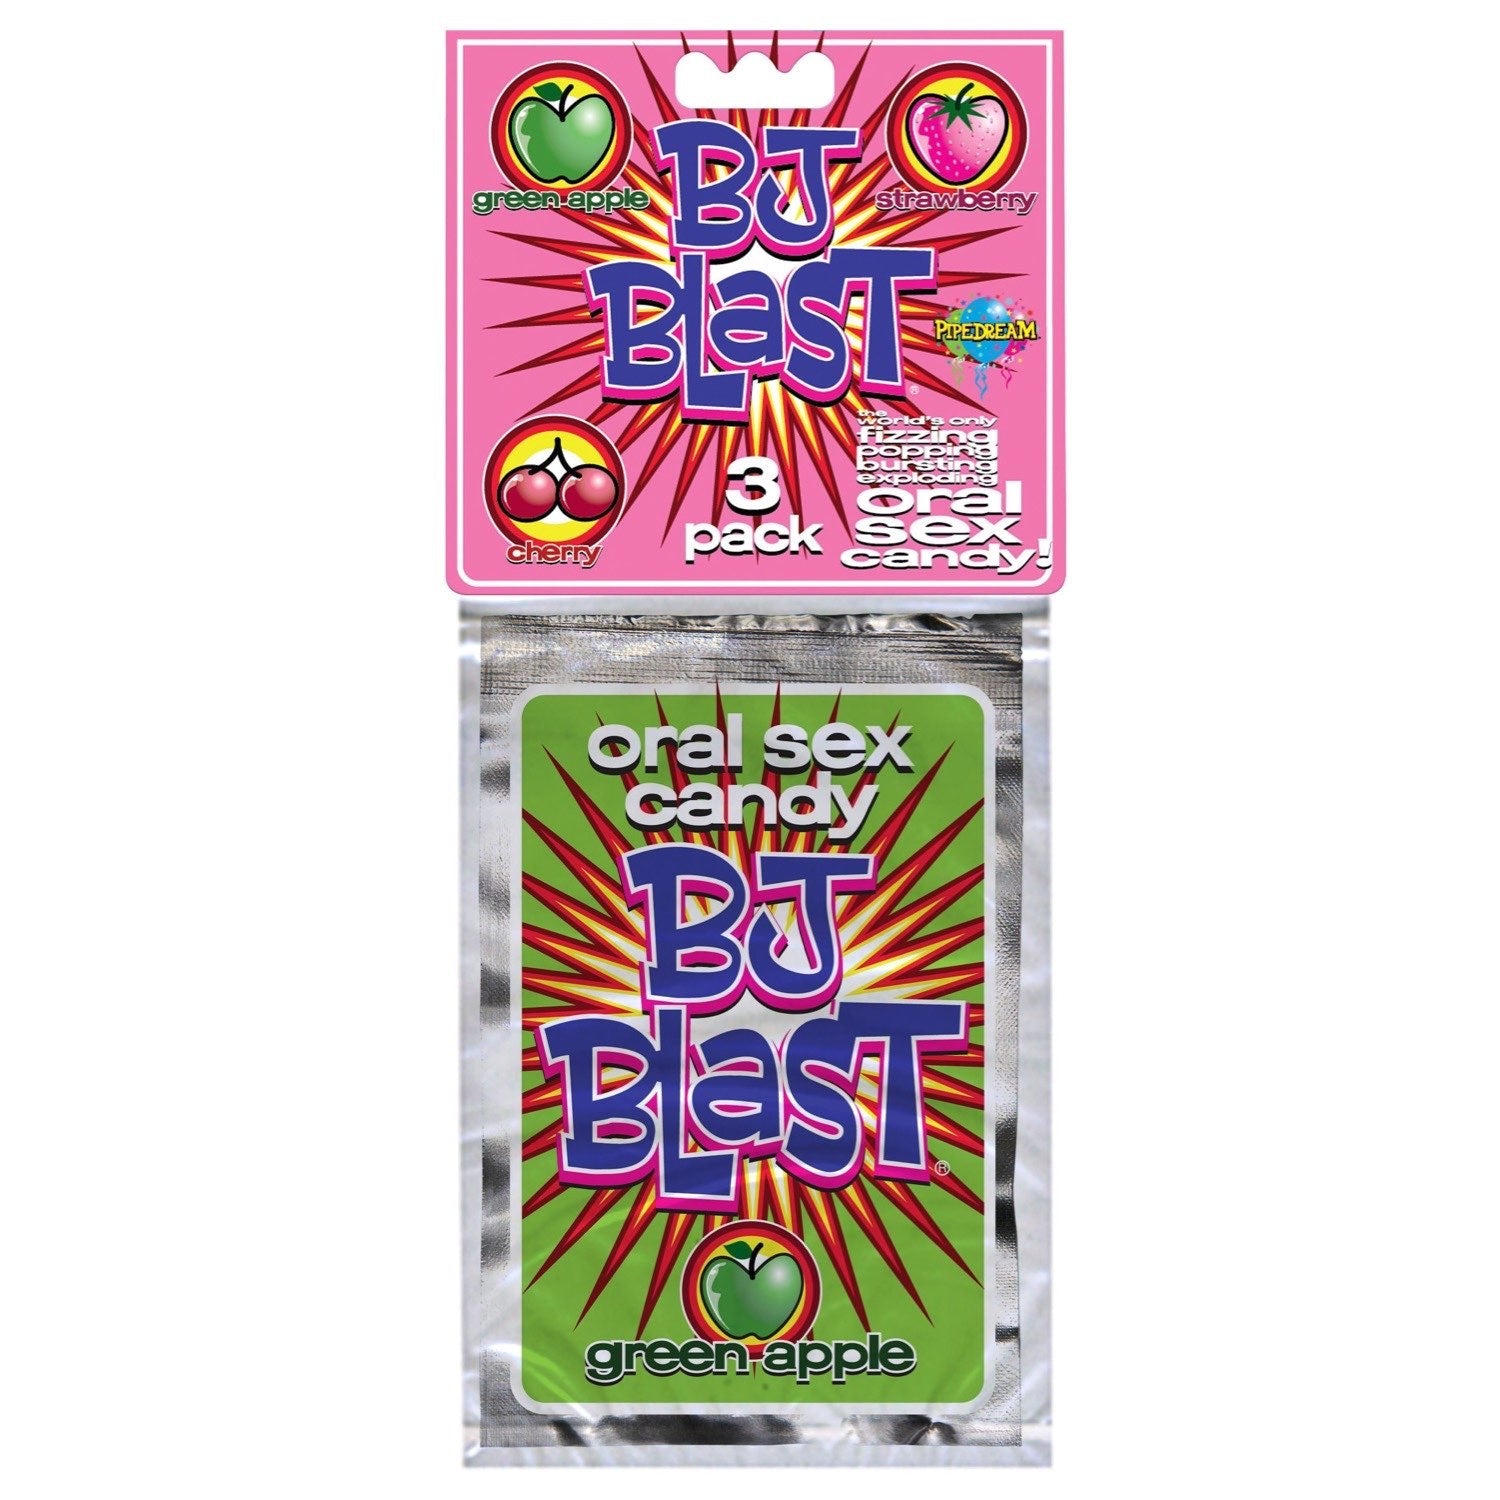  Bj Blast - Oral Sex Candy - 3 Pack by Pipedream